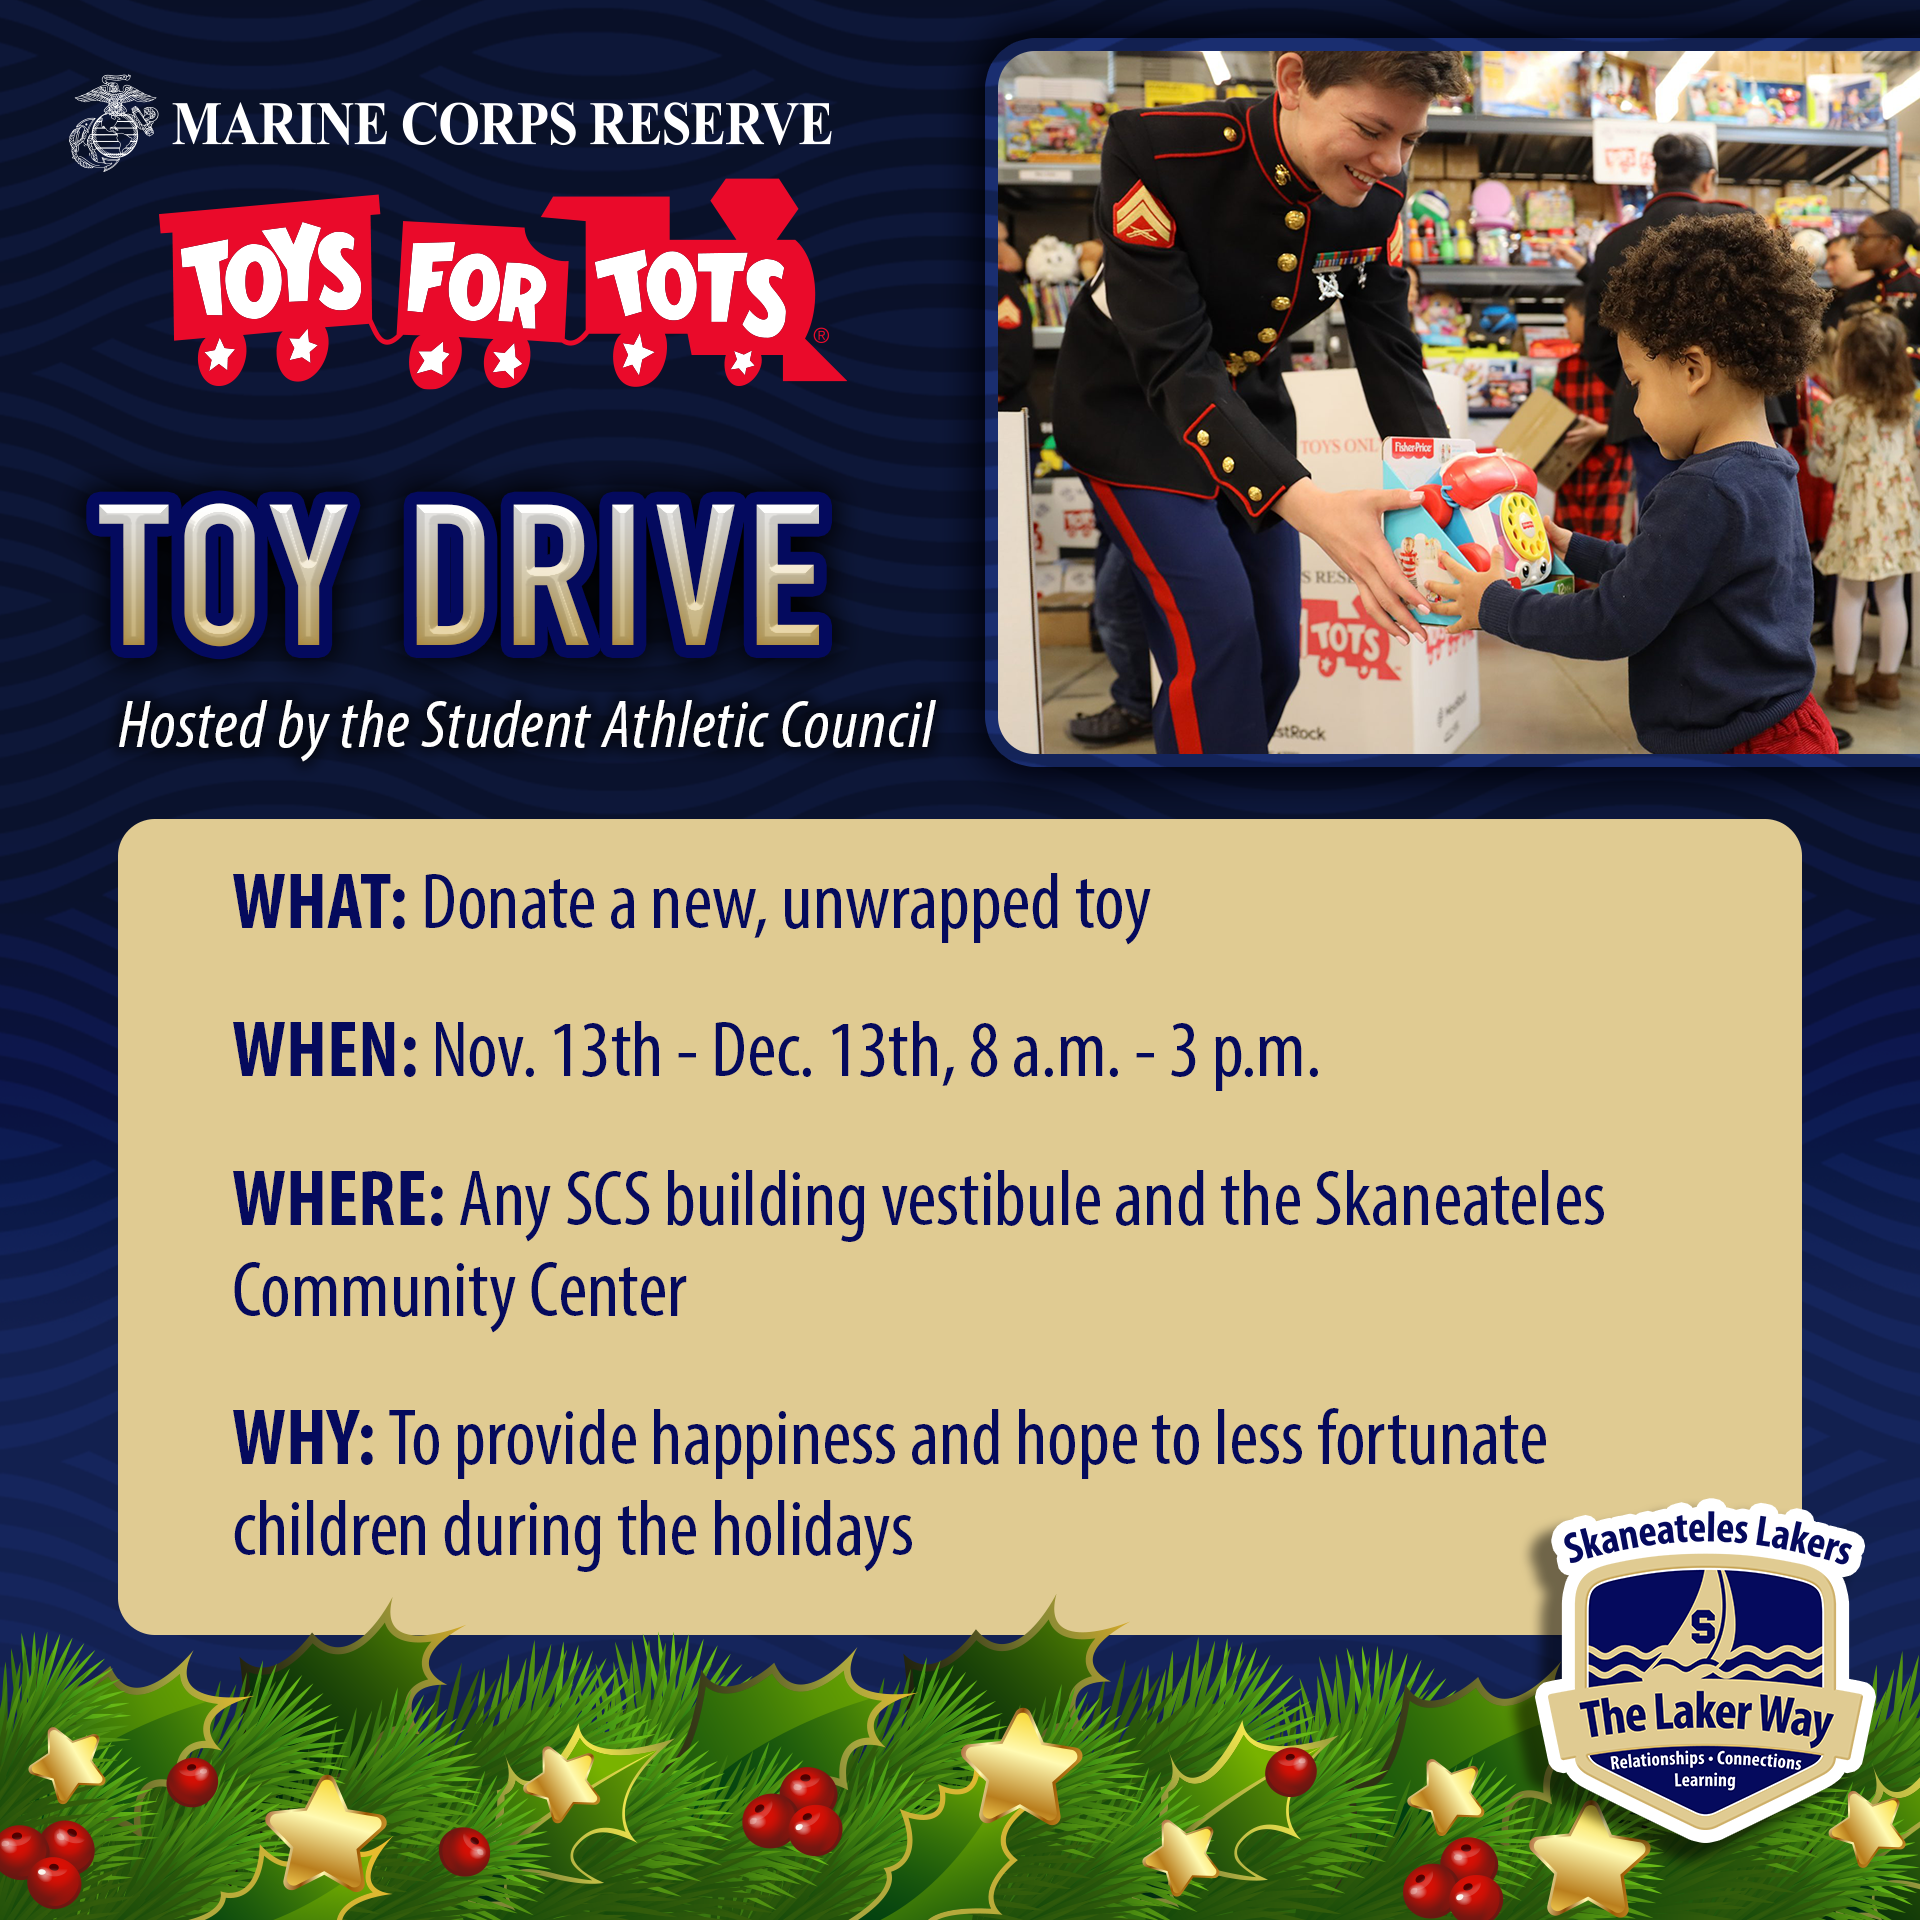 Student Athletic Council Toys for Tots toy drive:   What: Donate a new, unwrapped toy  When: Nov. 13th - Dec. 13th, 8am-3pm  Where: Any SCS building vestibule and the Skaneateles Community Center  Why: To provide happiness and hope to less fortunate children during the holidays